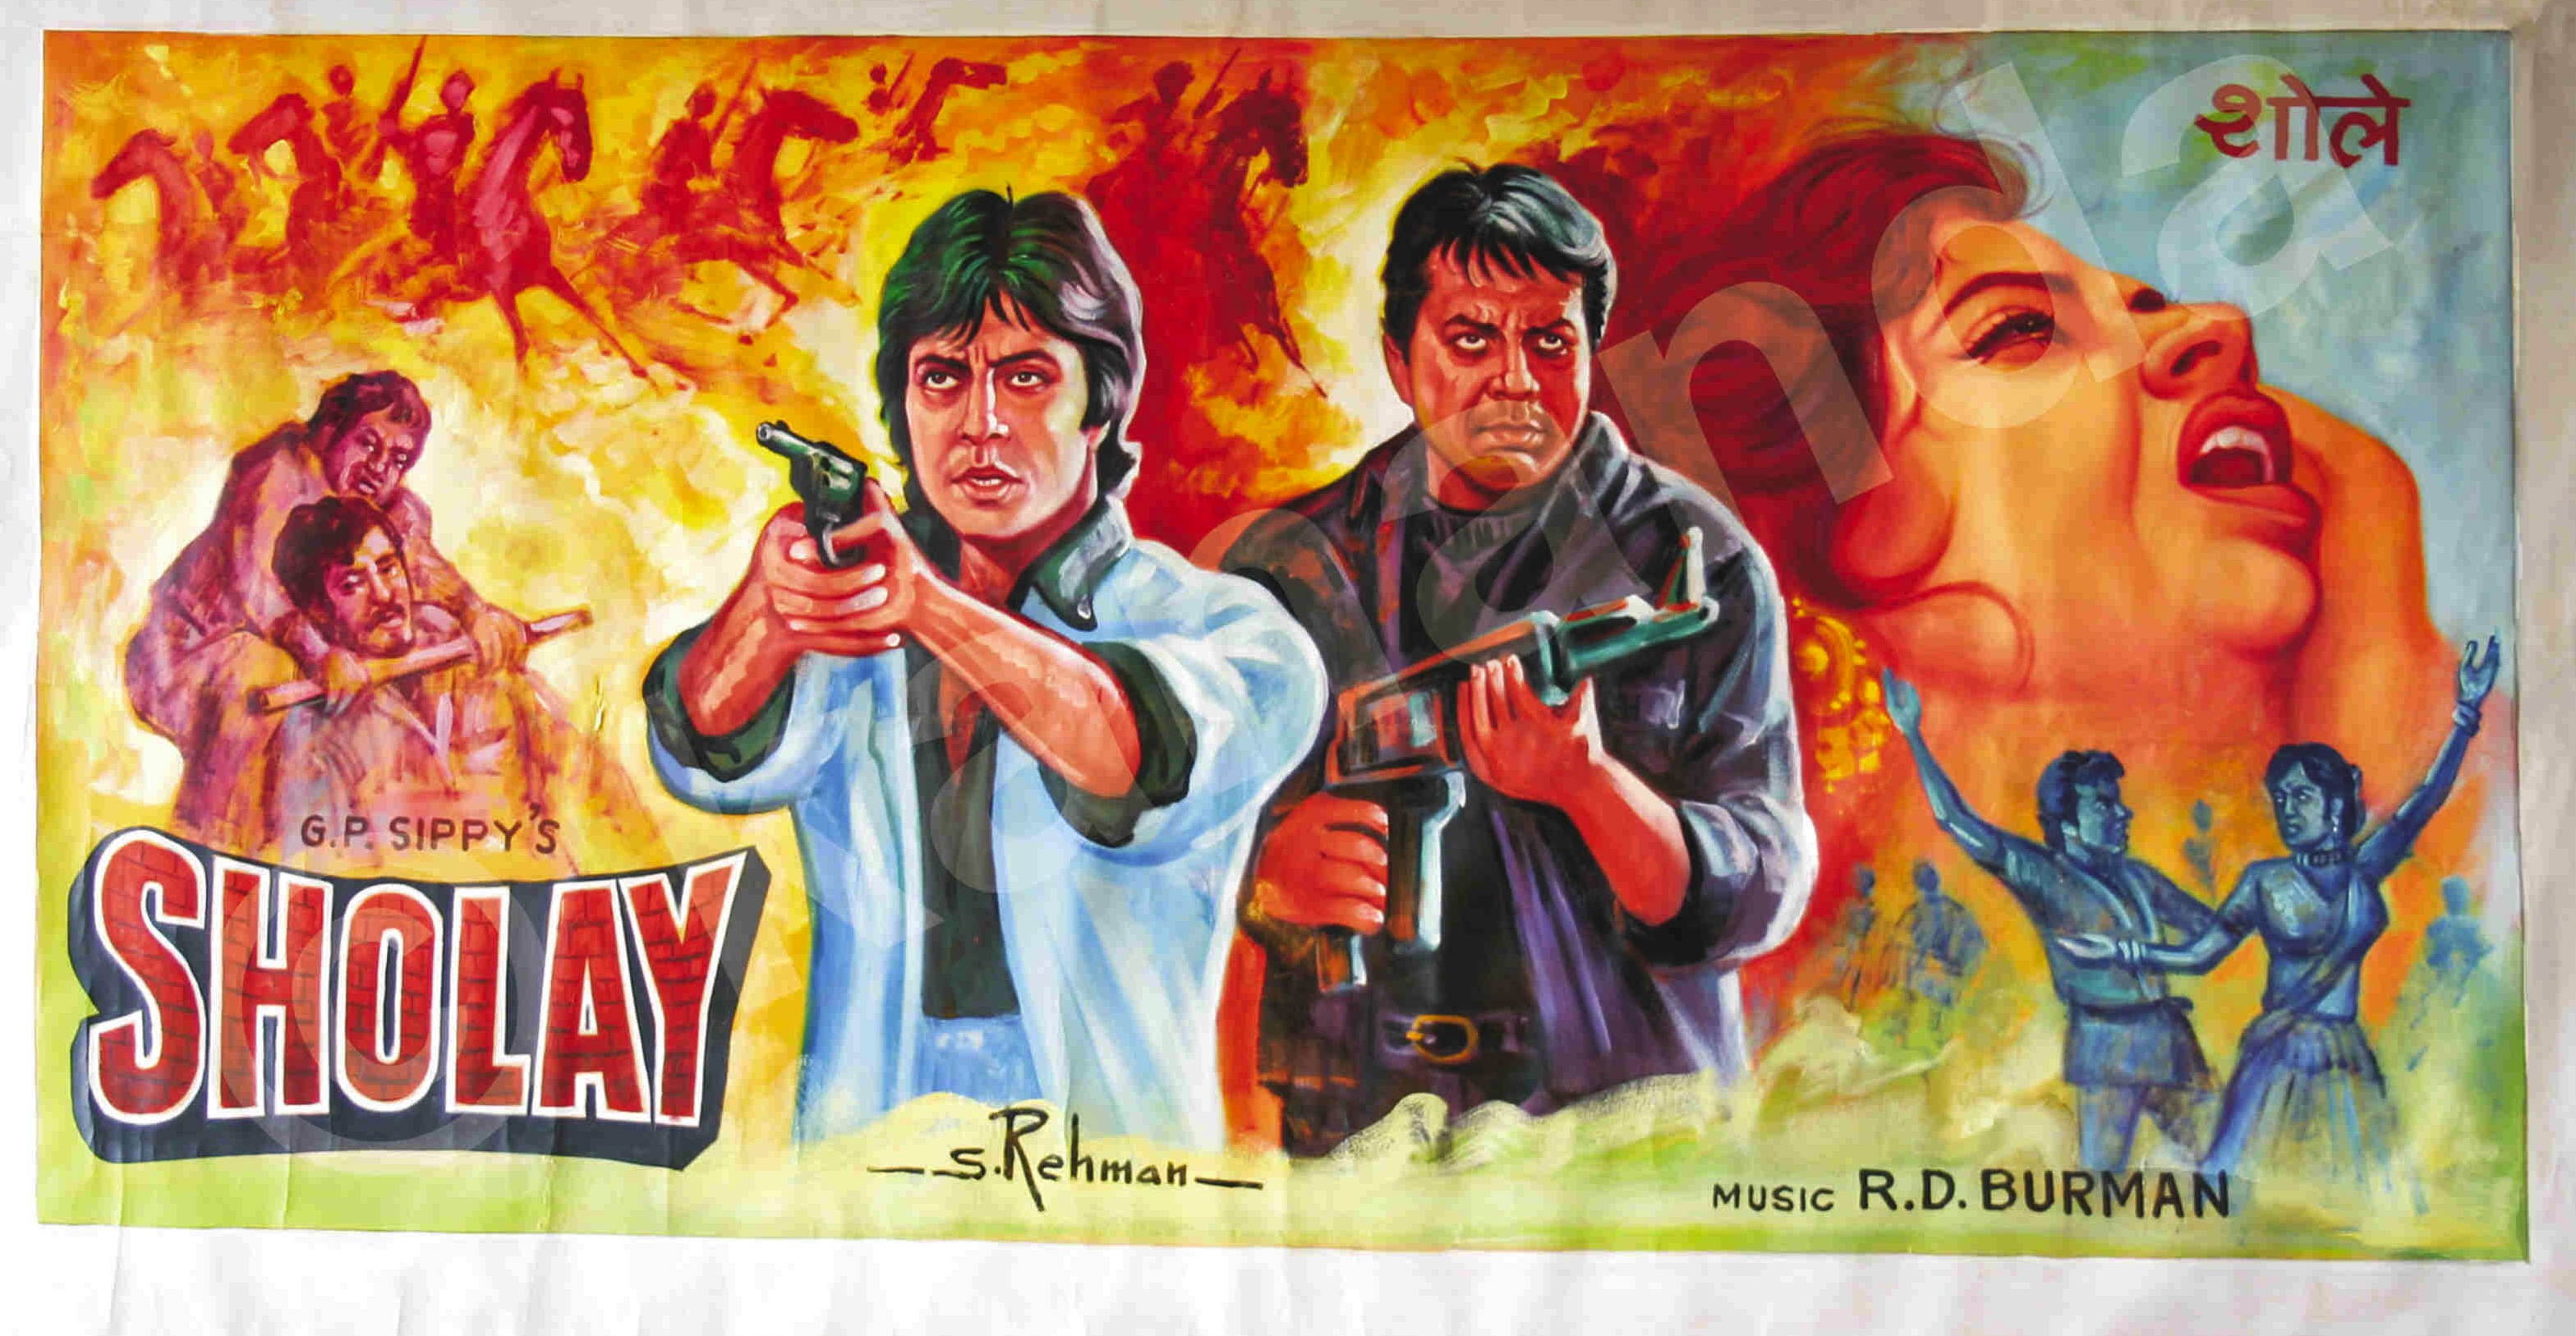 Old Bollywood Movie Posters: A Gallery of Fading Art | Mr. & Mrs. 55 –  Classic Bollywood Revisited!